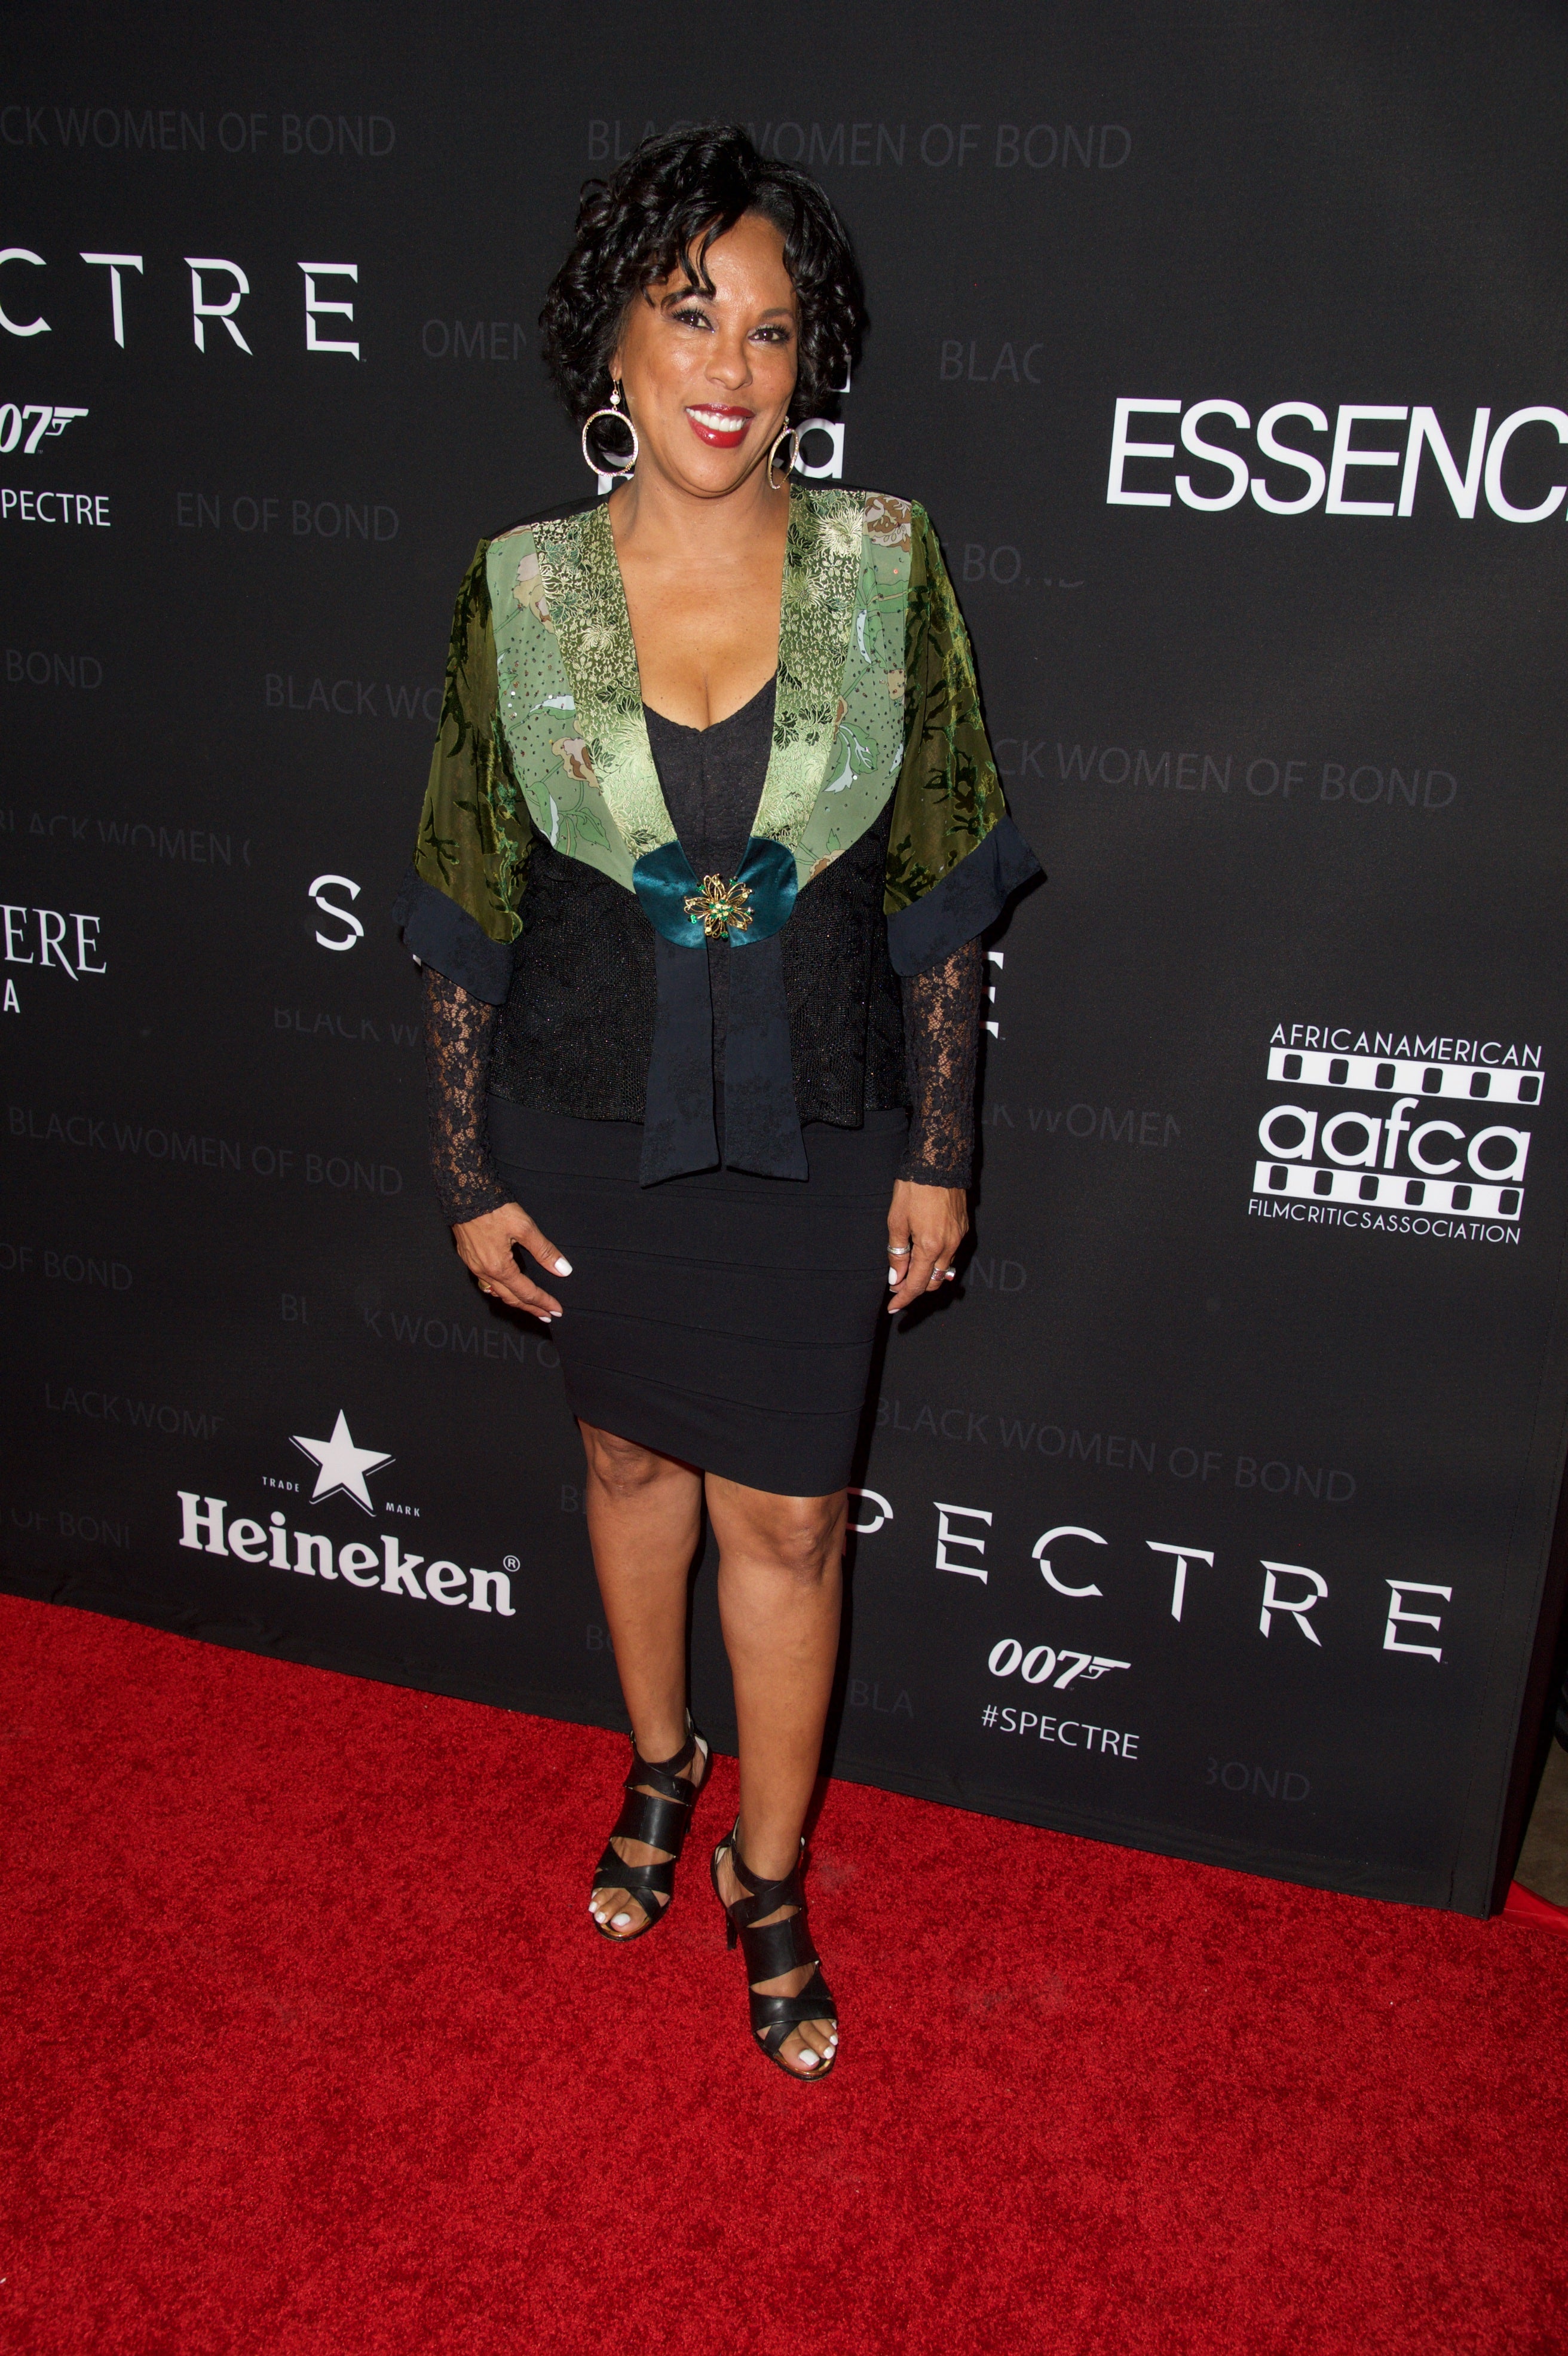 PHOTOS: On the Scene at the Black Women of Bond Tribute